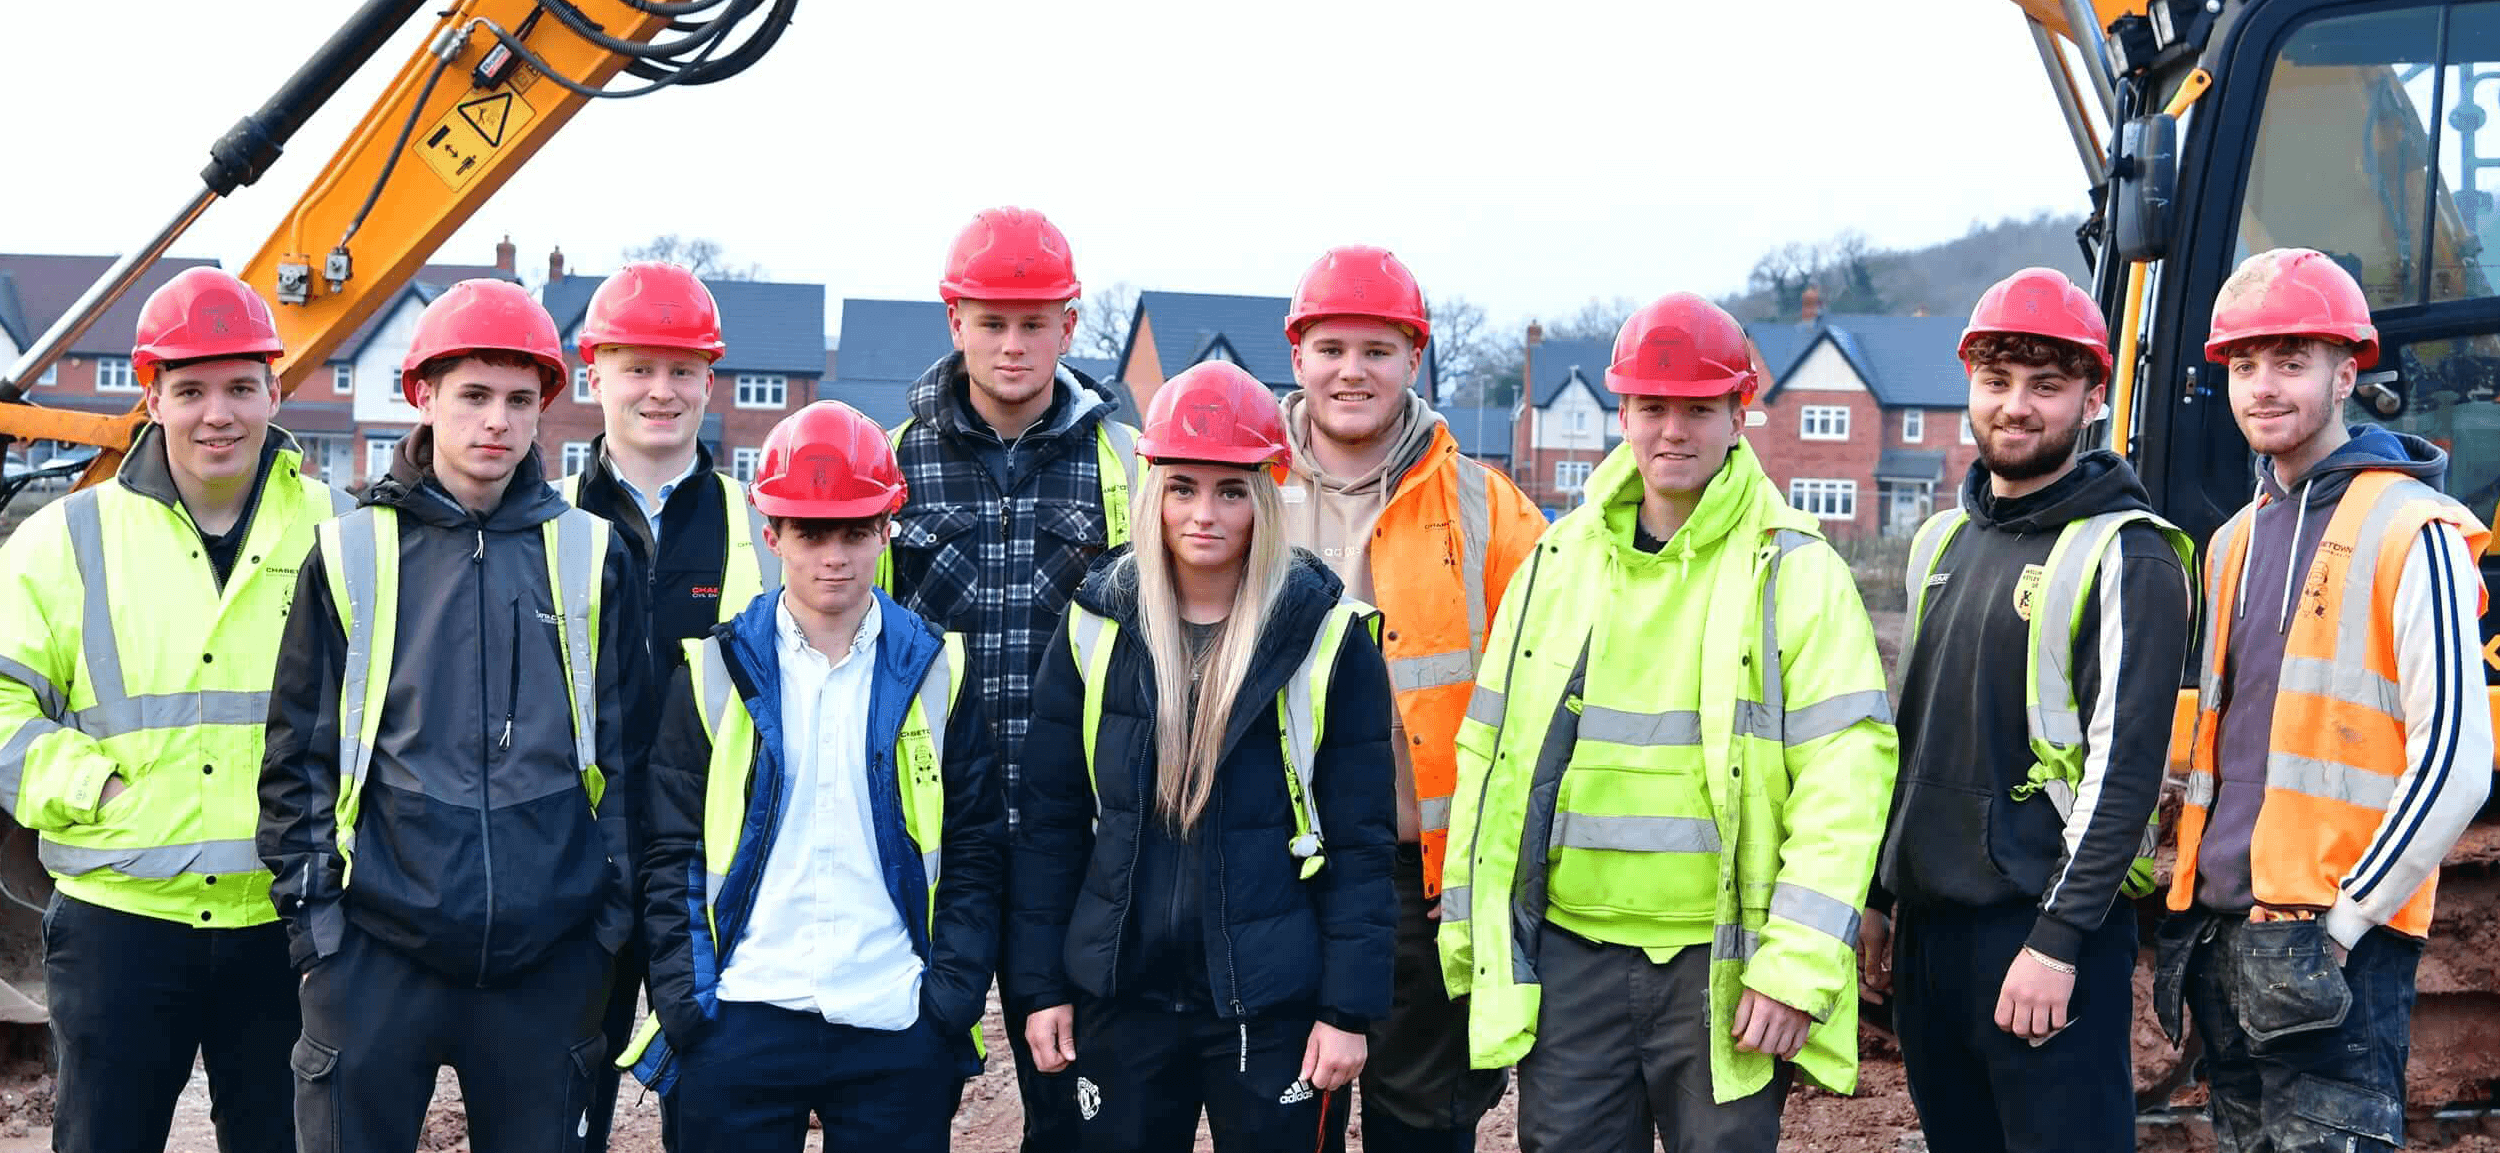 Group photo of apprentices on site with hard hats in front of excavator